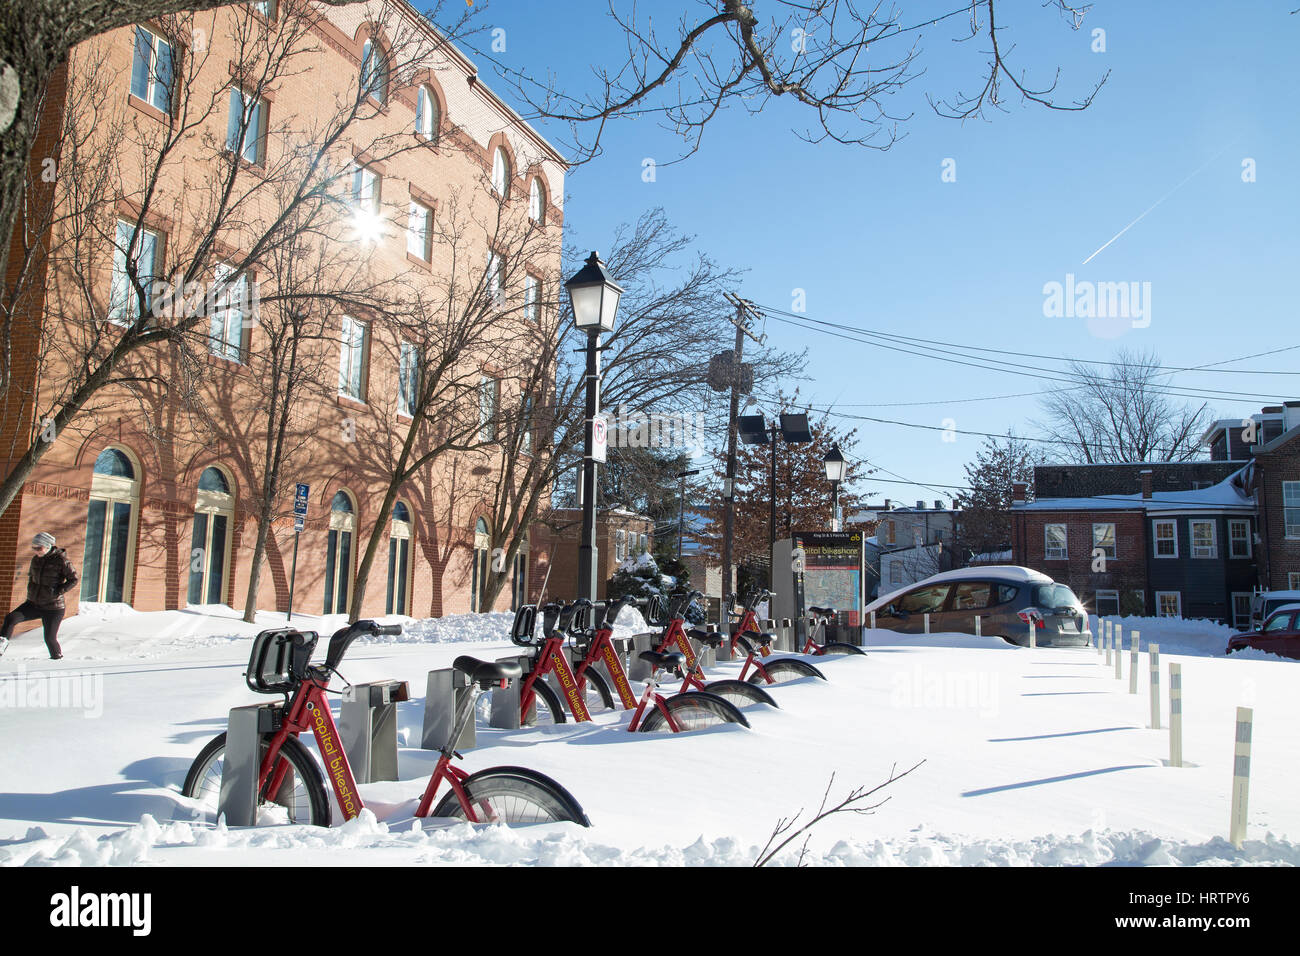 Snow-covered bikes parked after a snowstorm in Alexandria, Virginia. January 2016. Stock Photo